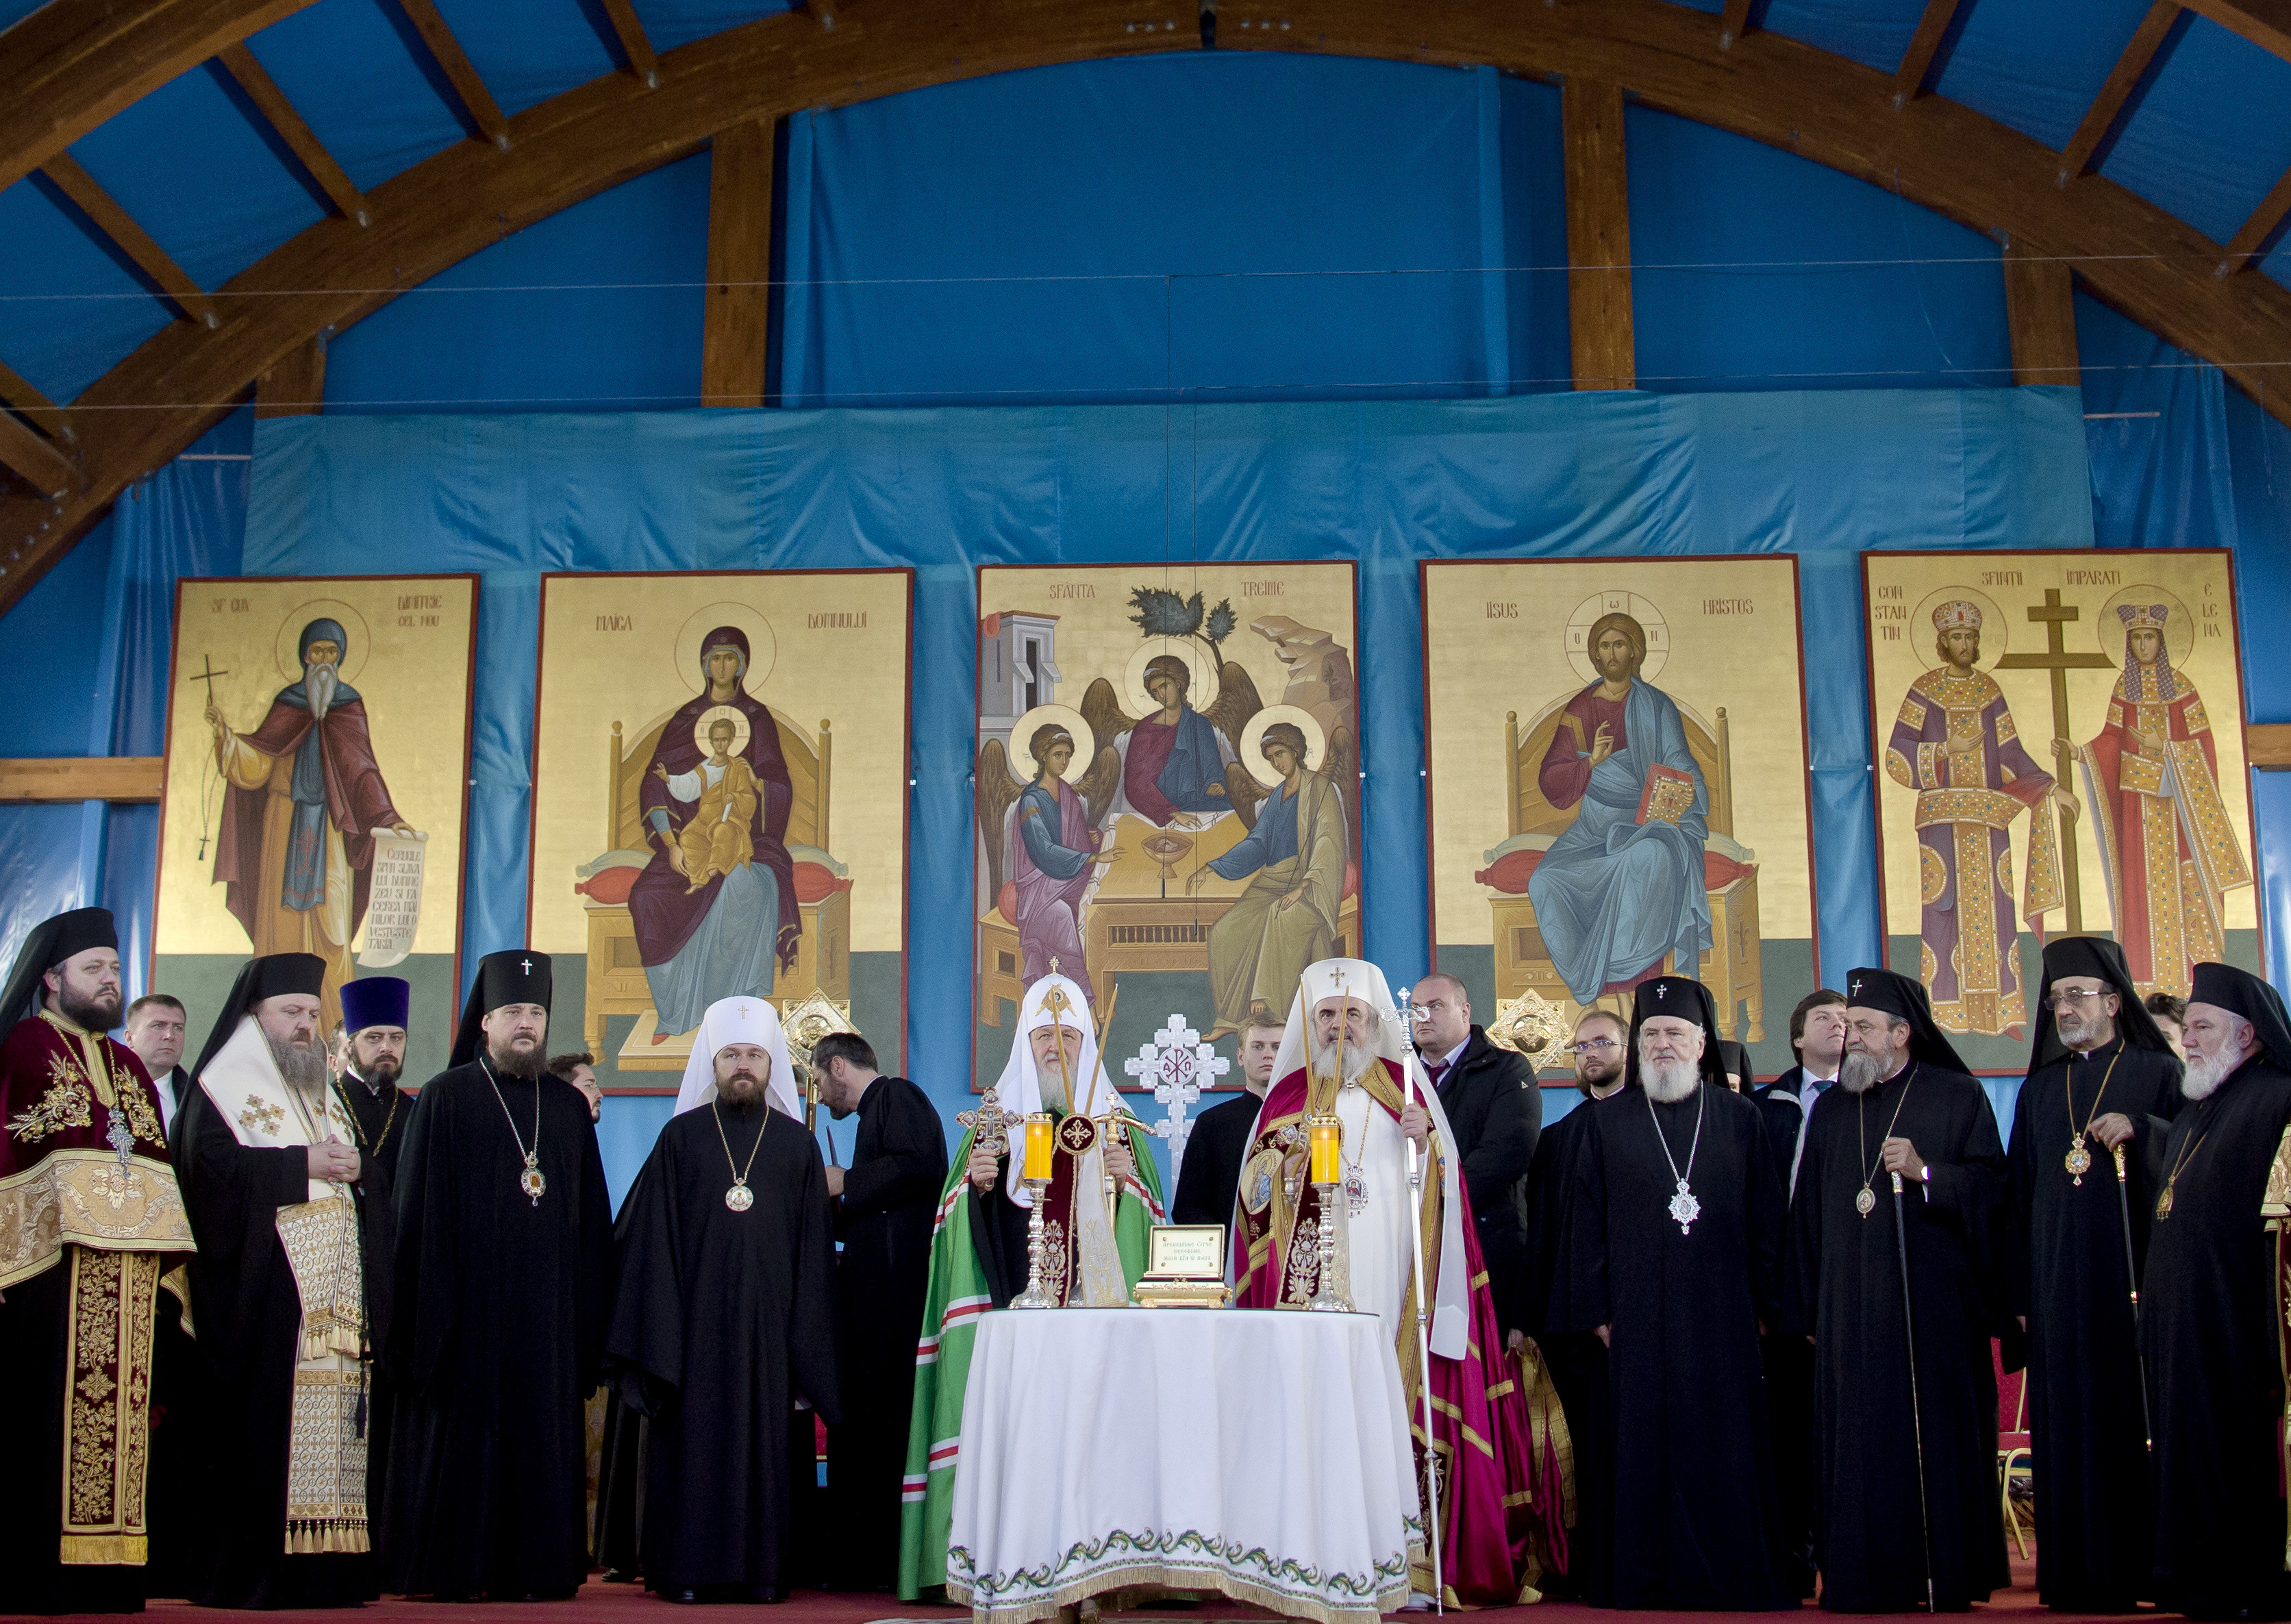 The head of the Russian Orthodox Church Patriarch Kirill, center left, takes part in a religious service together with the Patriarch of Romanian Orthodox Church Daniel at the Romanian patriarchal cathedral in Bucharest, Romania, Thursday, Oct. 26, 2017. Russian Orthodox patriarch of Moscow Kirill arrived in Romania as the first visit by the head of the powerful Russian church since communism ended. (AP Photo/Andreea Alexandru)